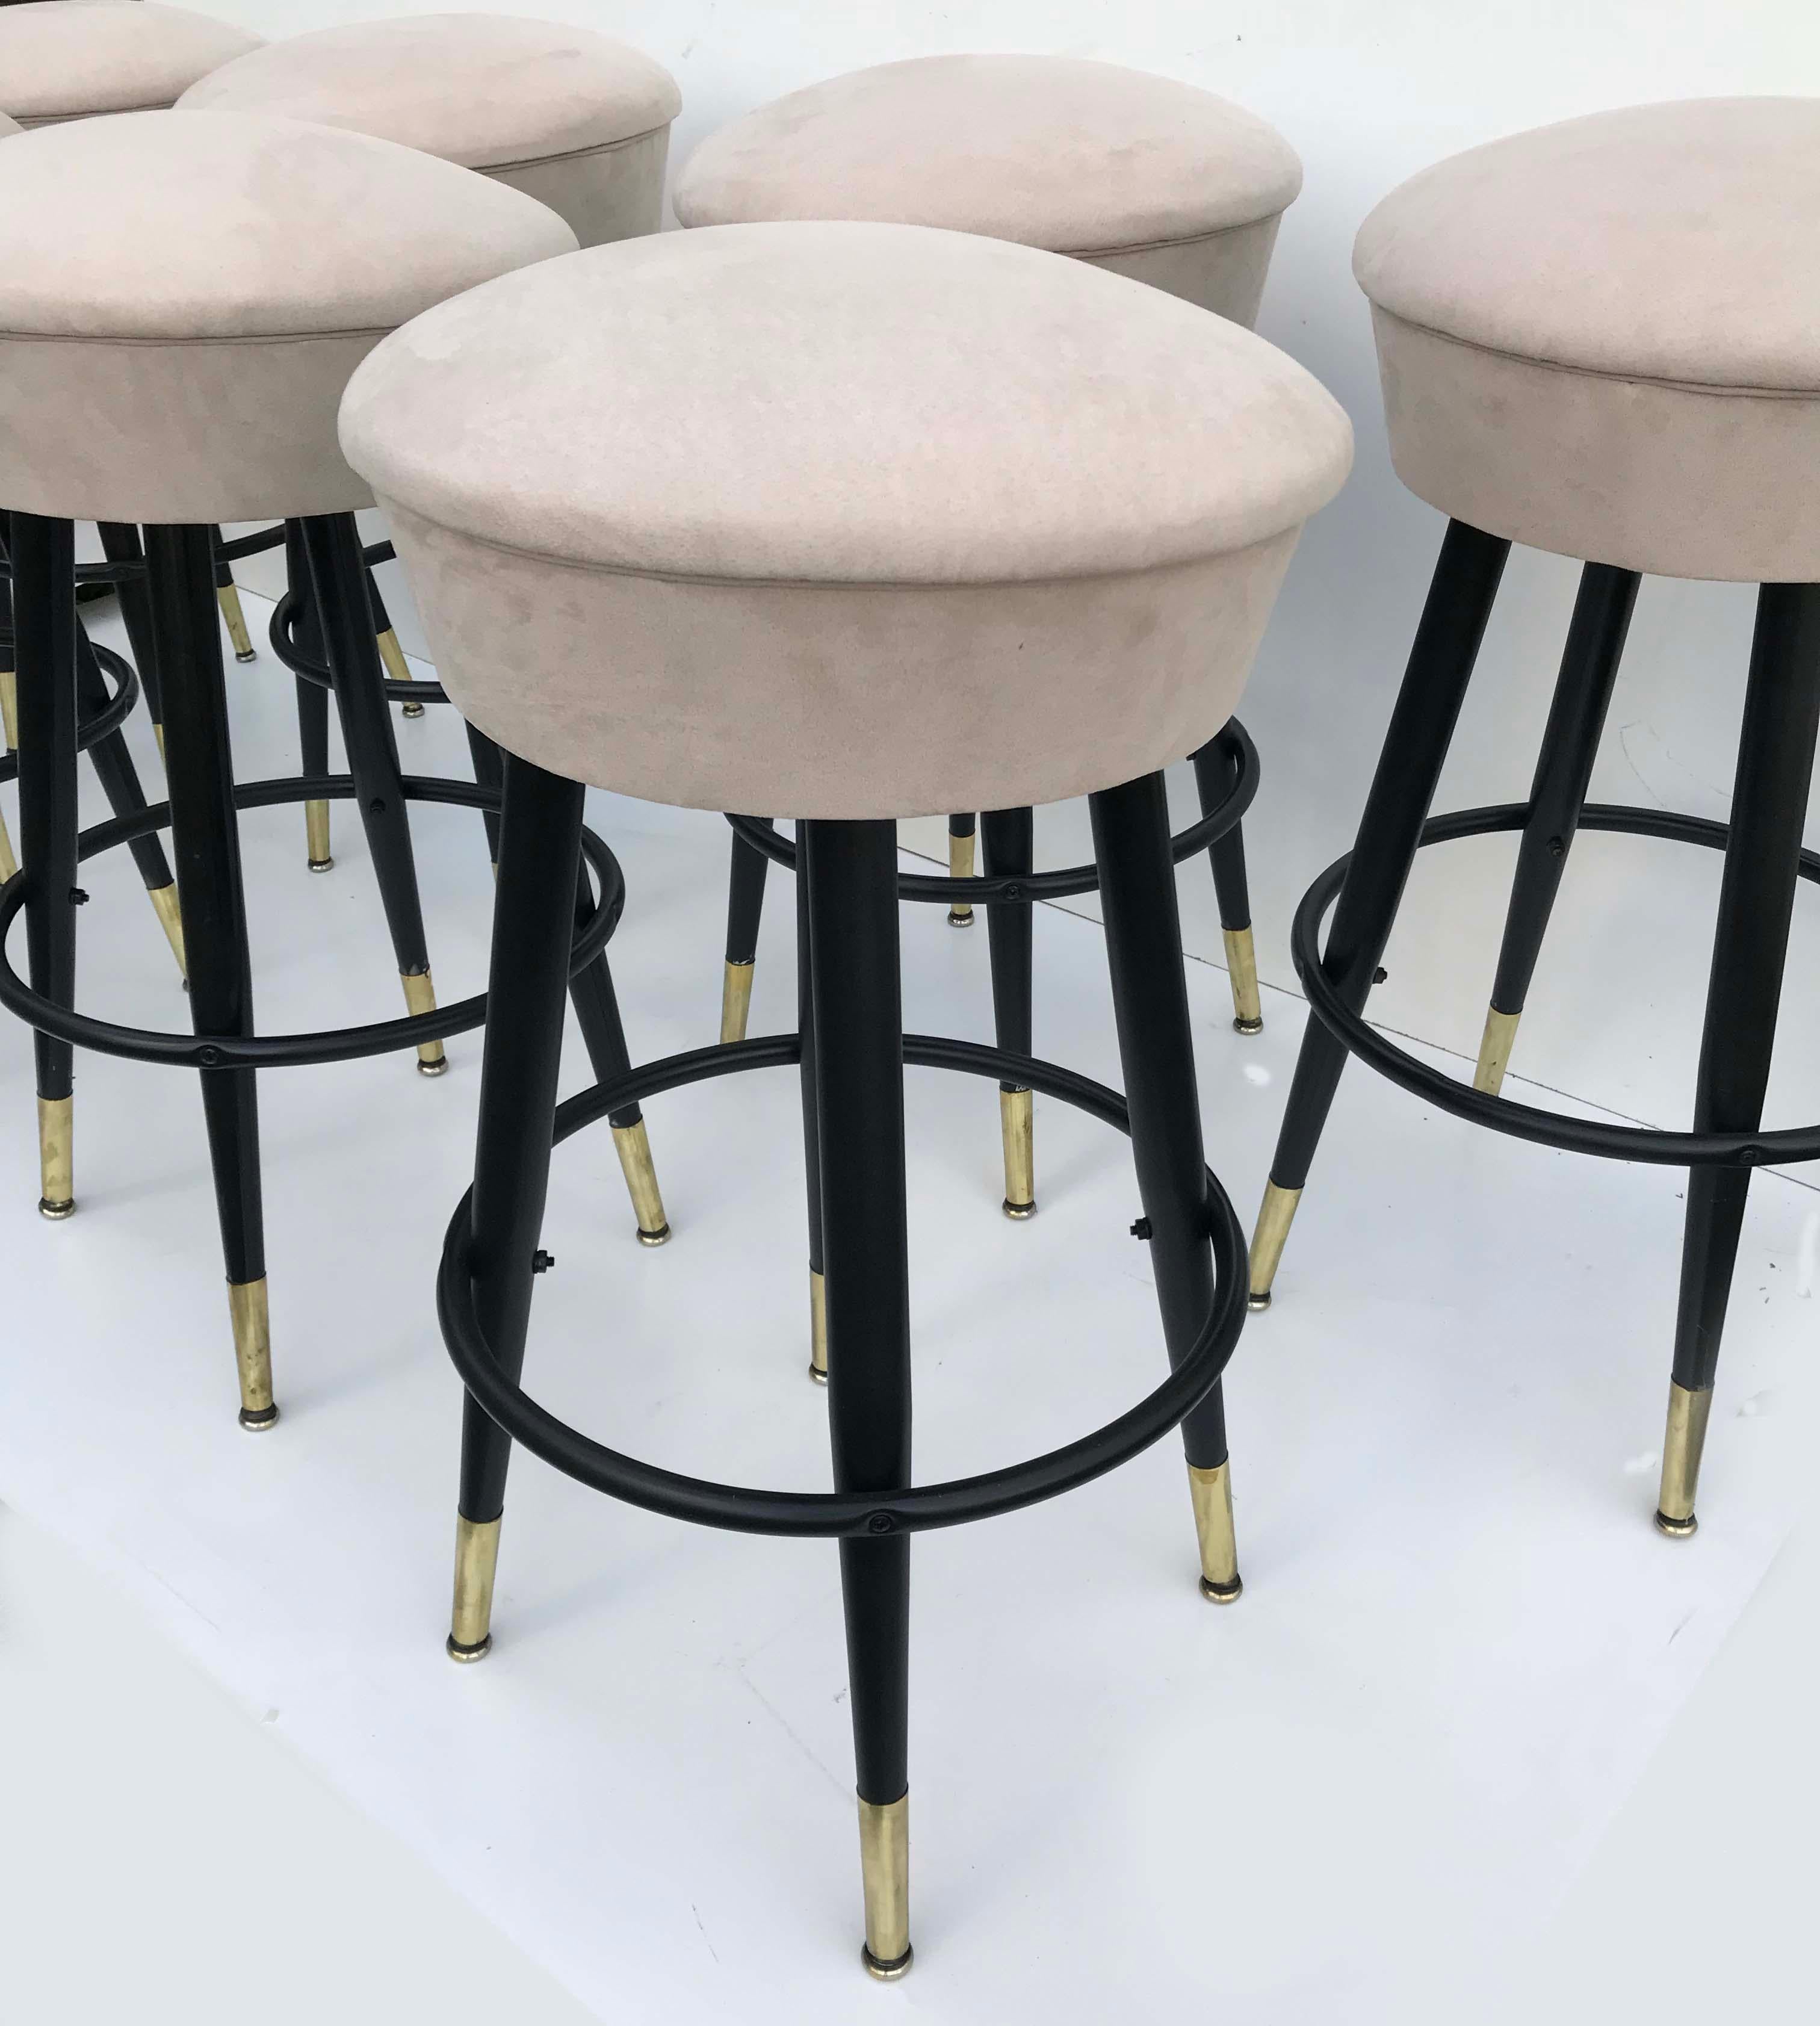 Superb set of 8 swiveling bar stools
Newly restored and refinished
New suede upholstery.
Solid, heavy and sturdy
Measures: Base 20